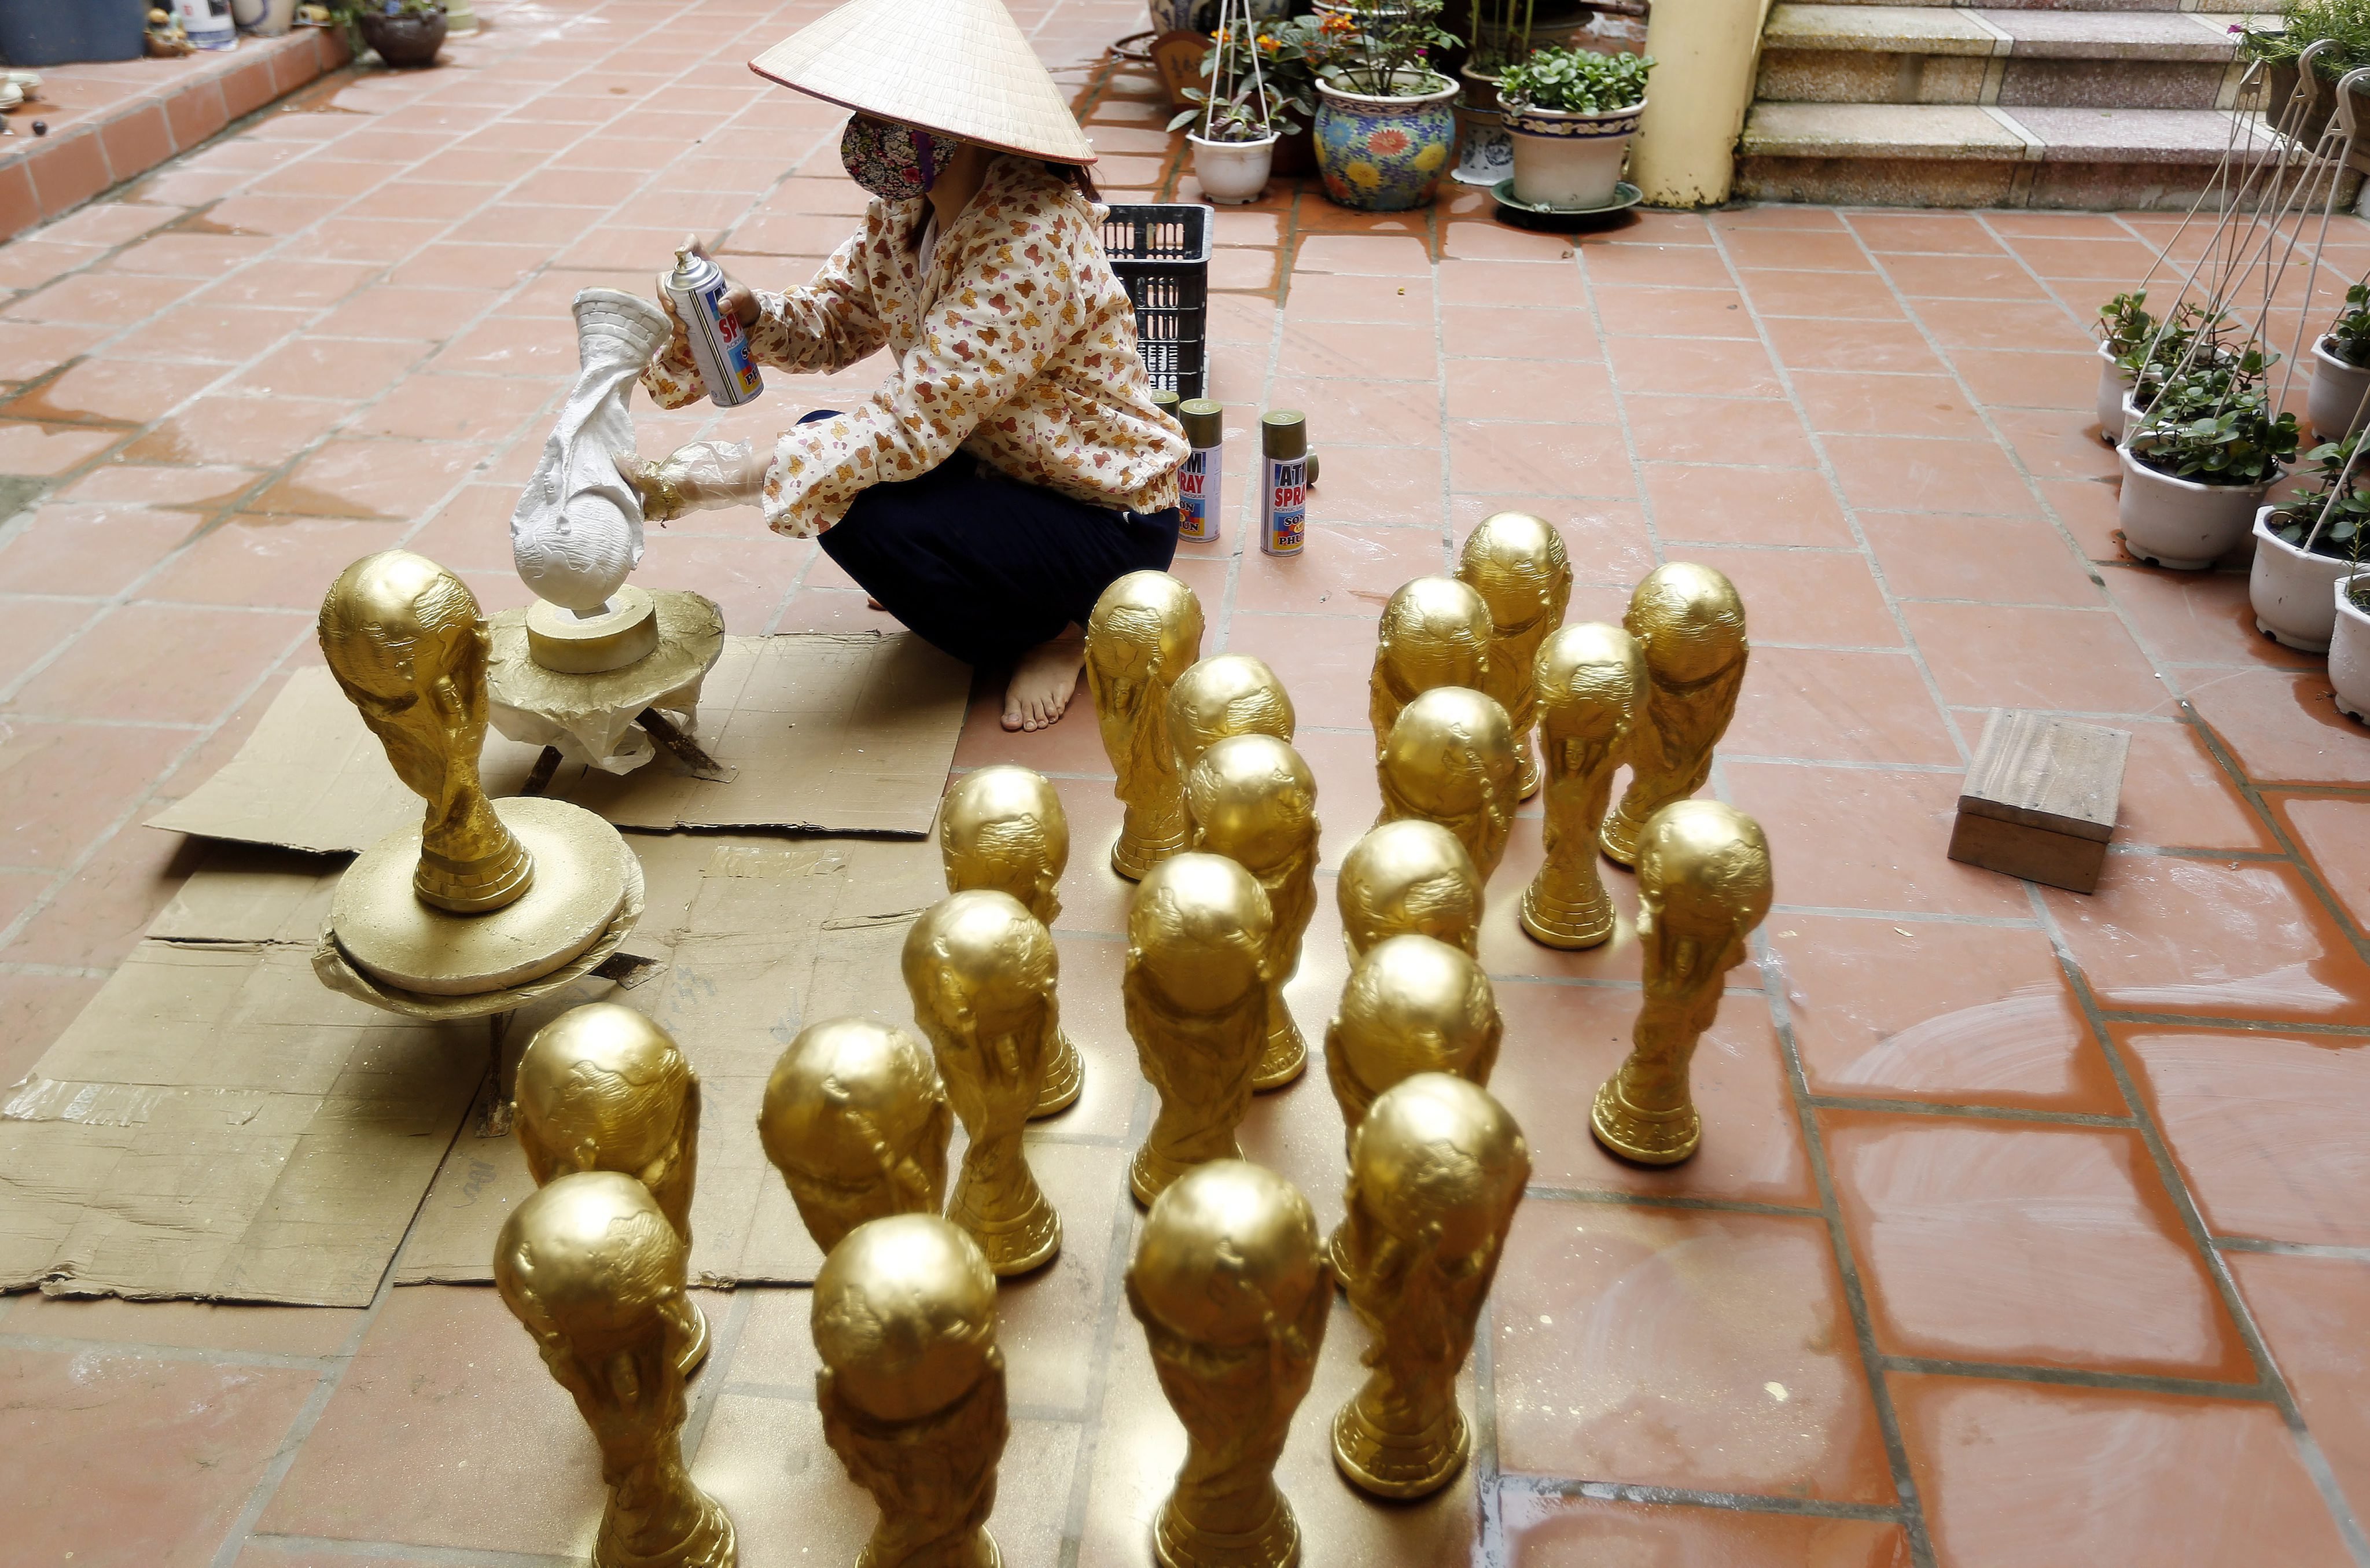 A woman paints a gypsum-made FIFA World Cup trophy at her home, in Bat Trang pottery village, Hanoi, Vietnam on June 19, 2014.